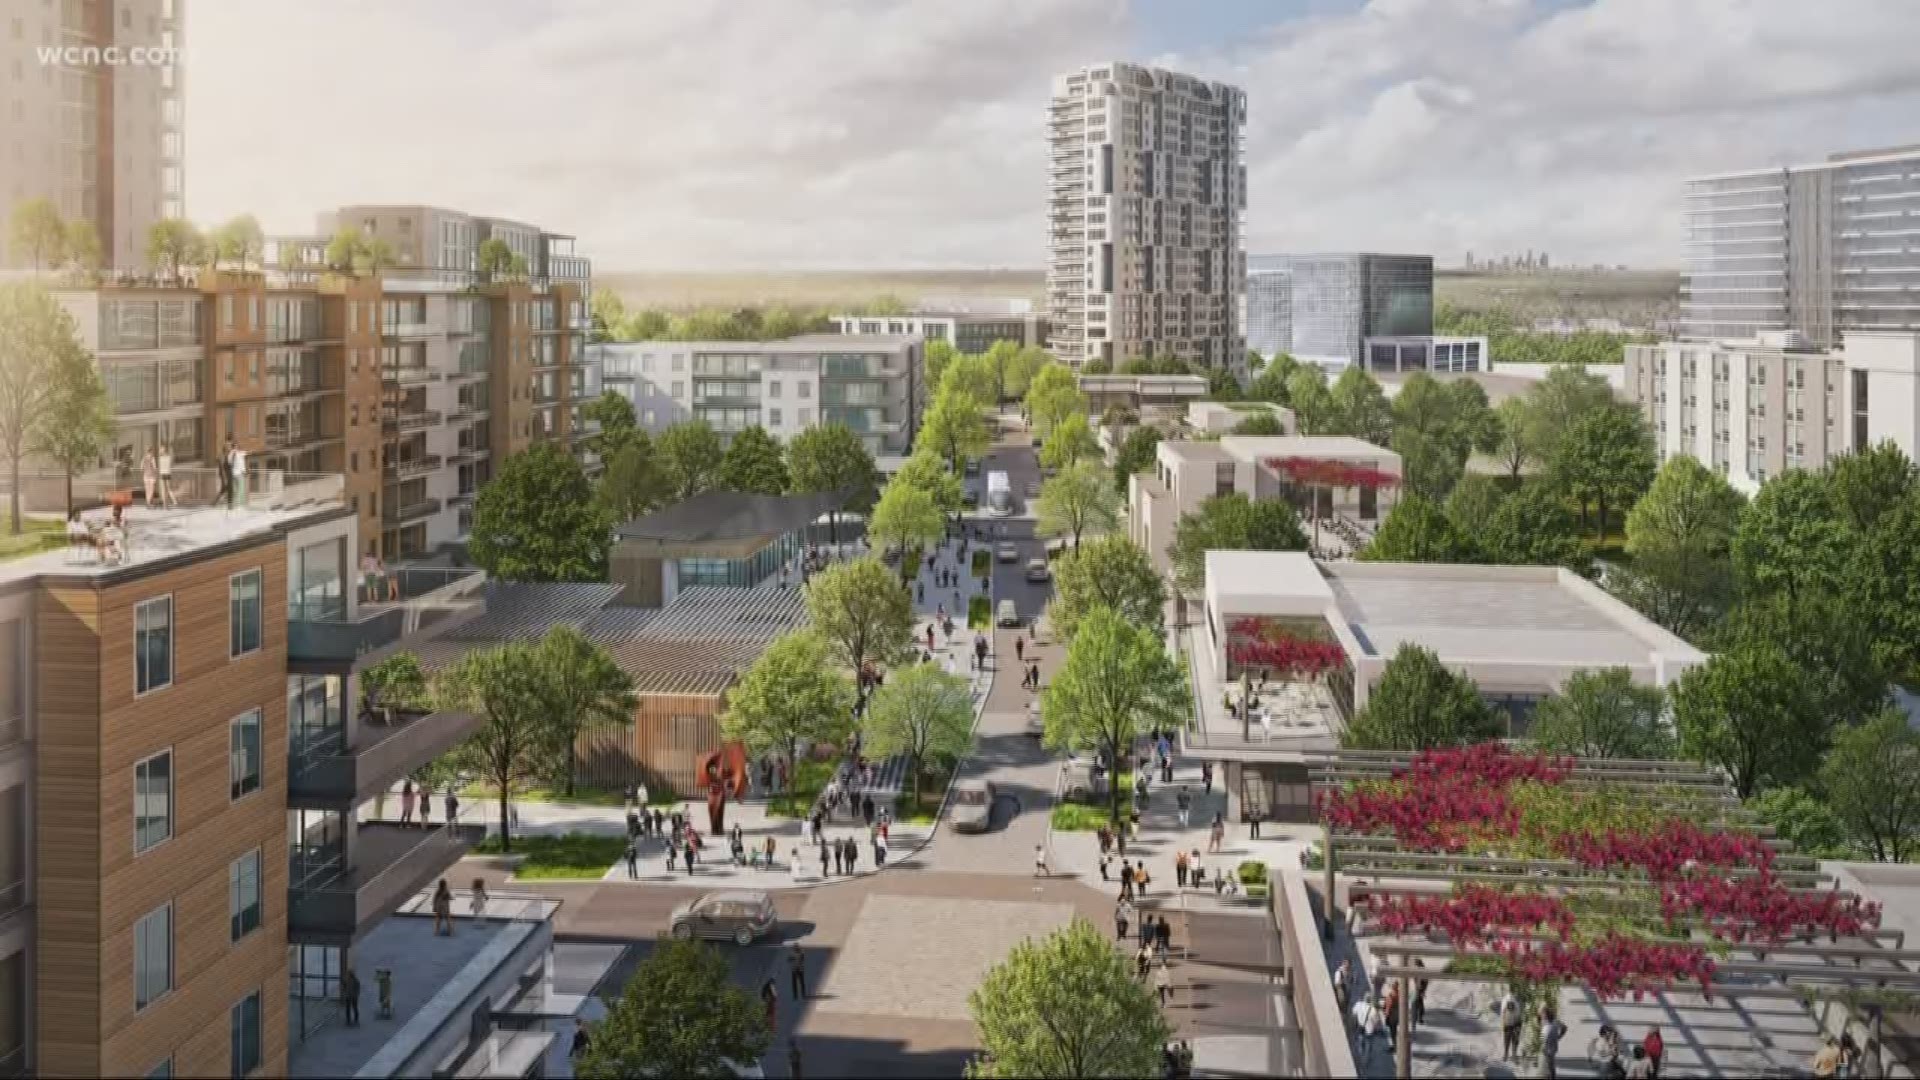 Renderings show the face-lift planned for the area.
The plan would be to add shops, restaurants, businesses and thousands of new apartments.